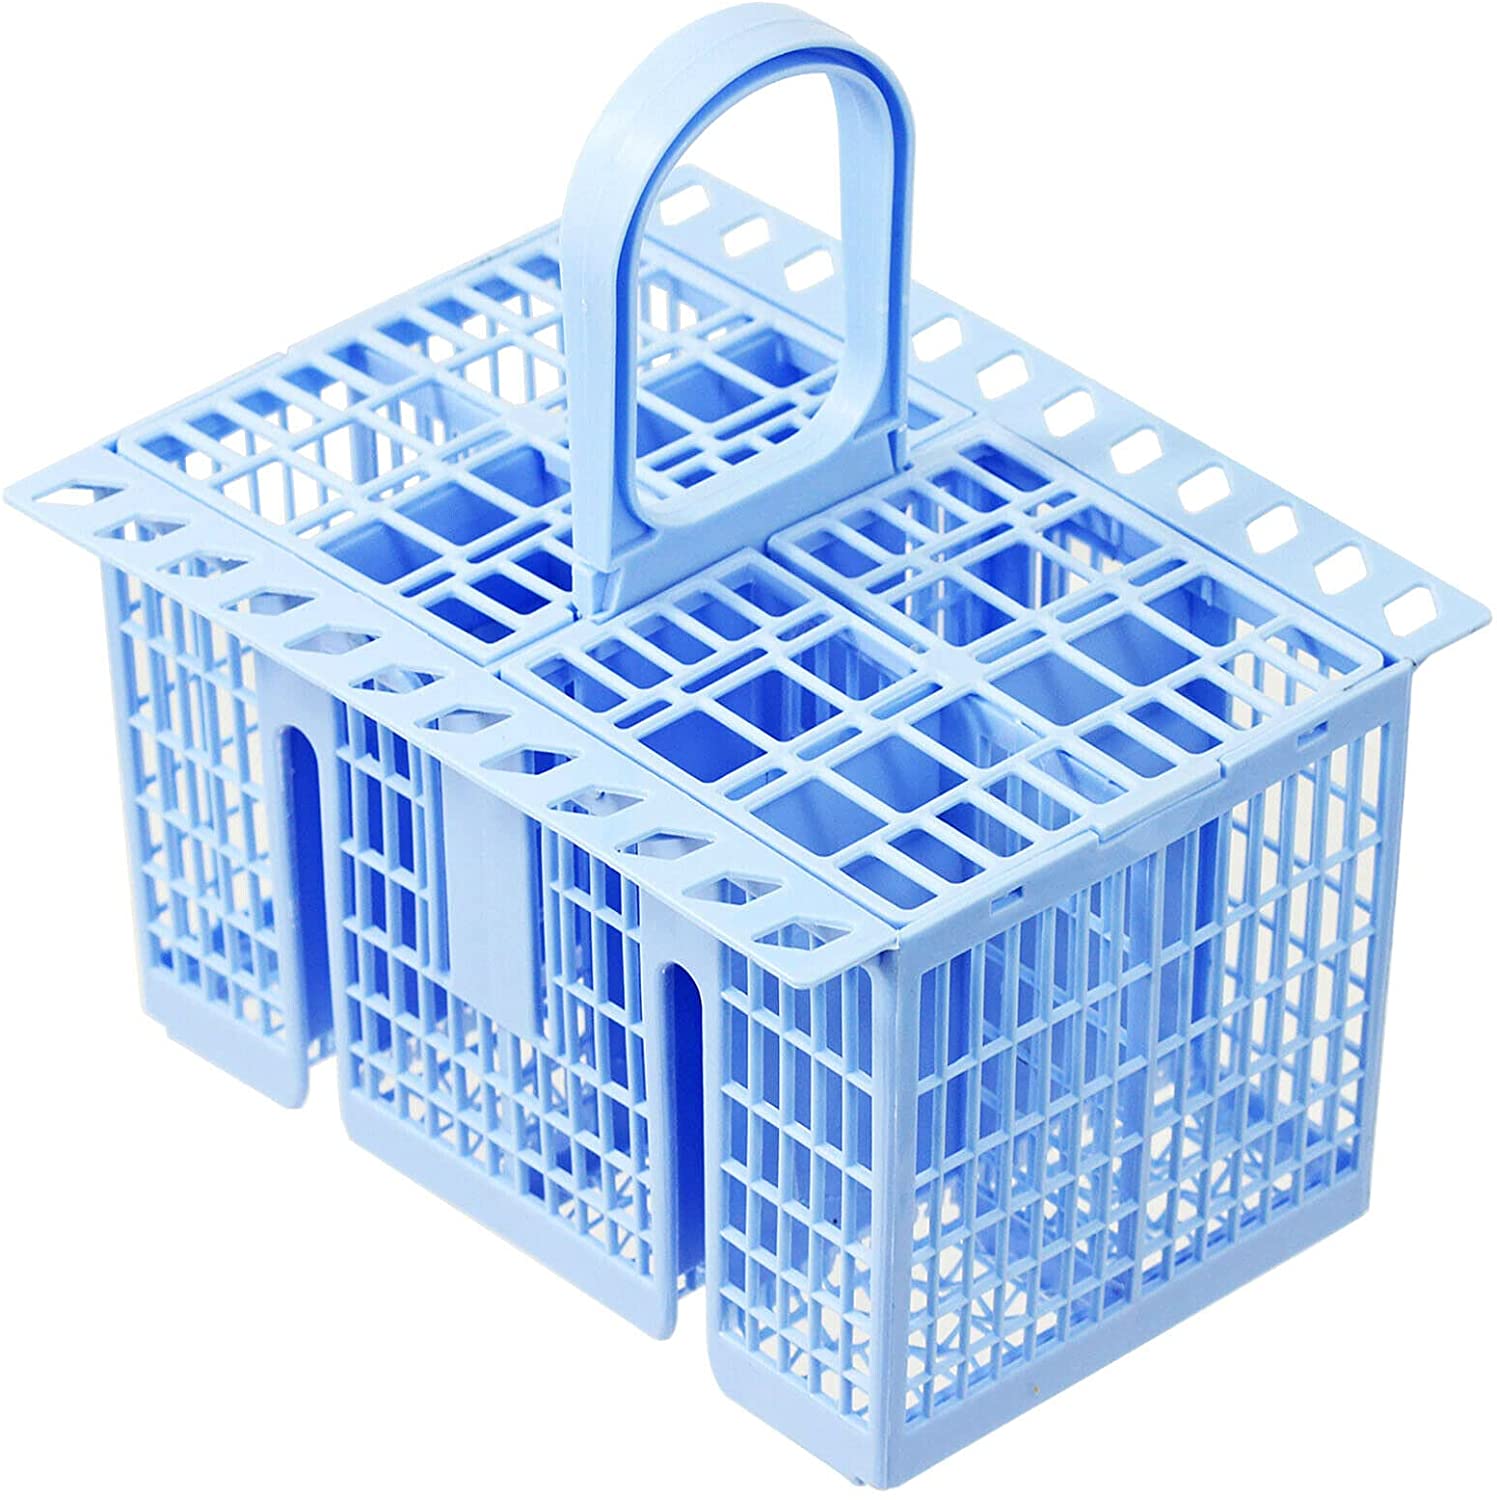 SPARES2GO Cutlery Basket compatible with Matsui Dishwasher (Blue, 220 x 208 x 160mm)